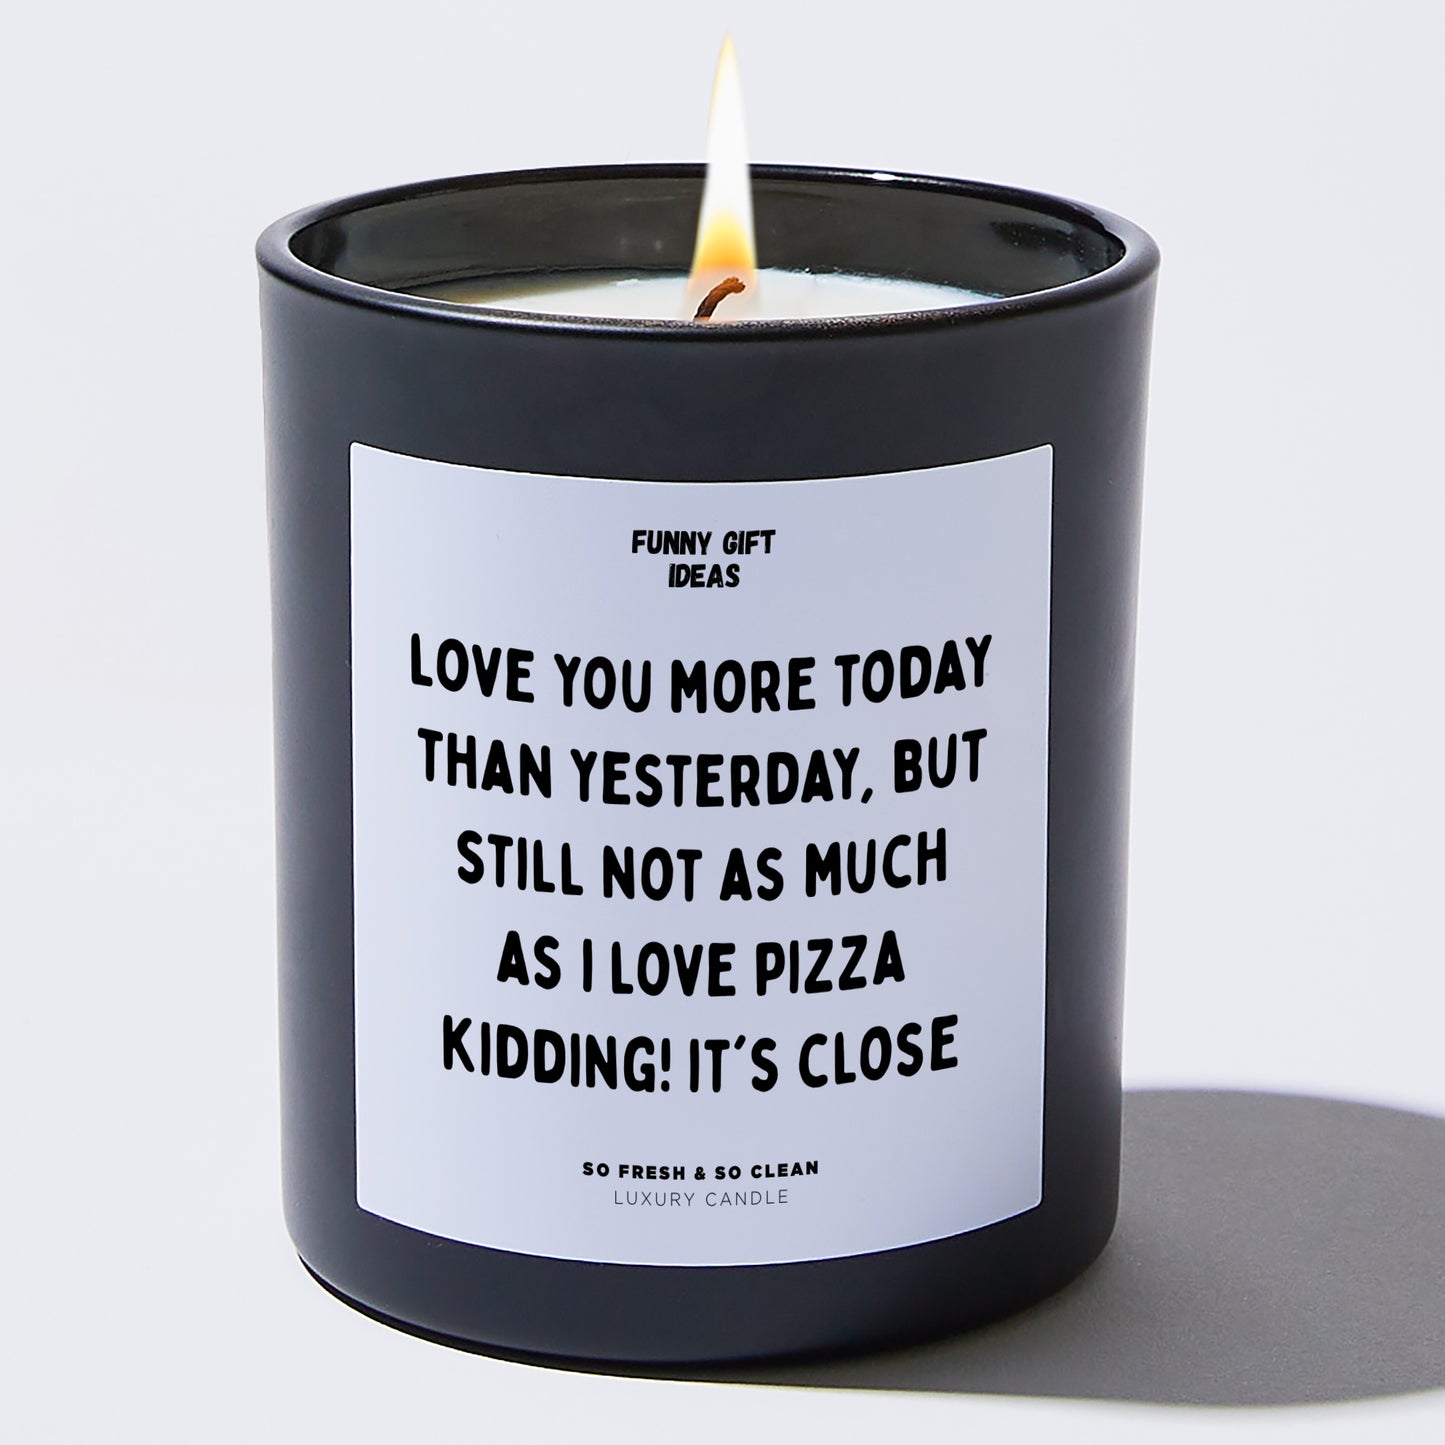 Anniversary Present - Love You More Today Than Yesterday, but Still Not as Much as I Love Pizza. Kidding! It's Close. - Candle